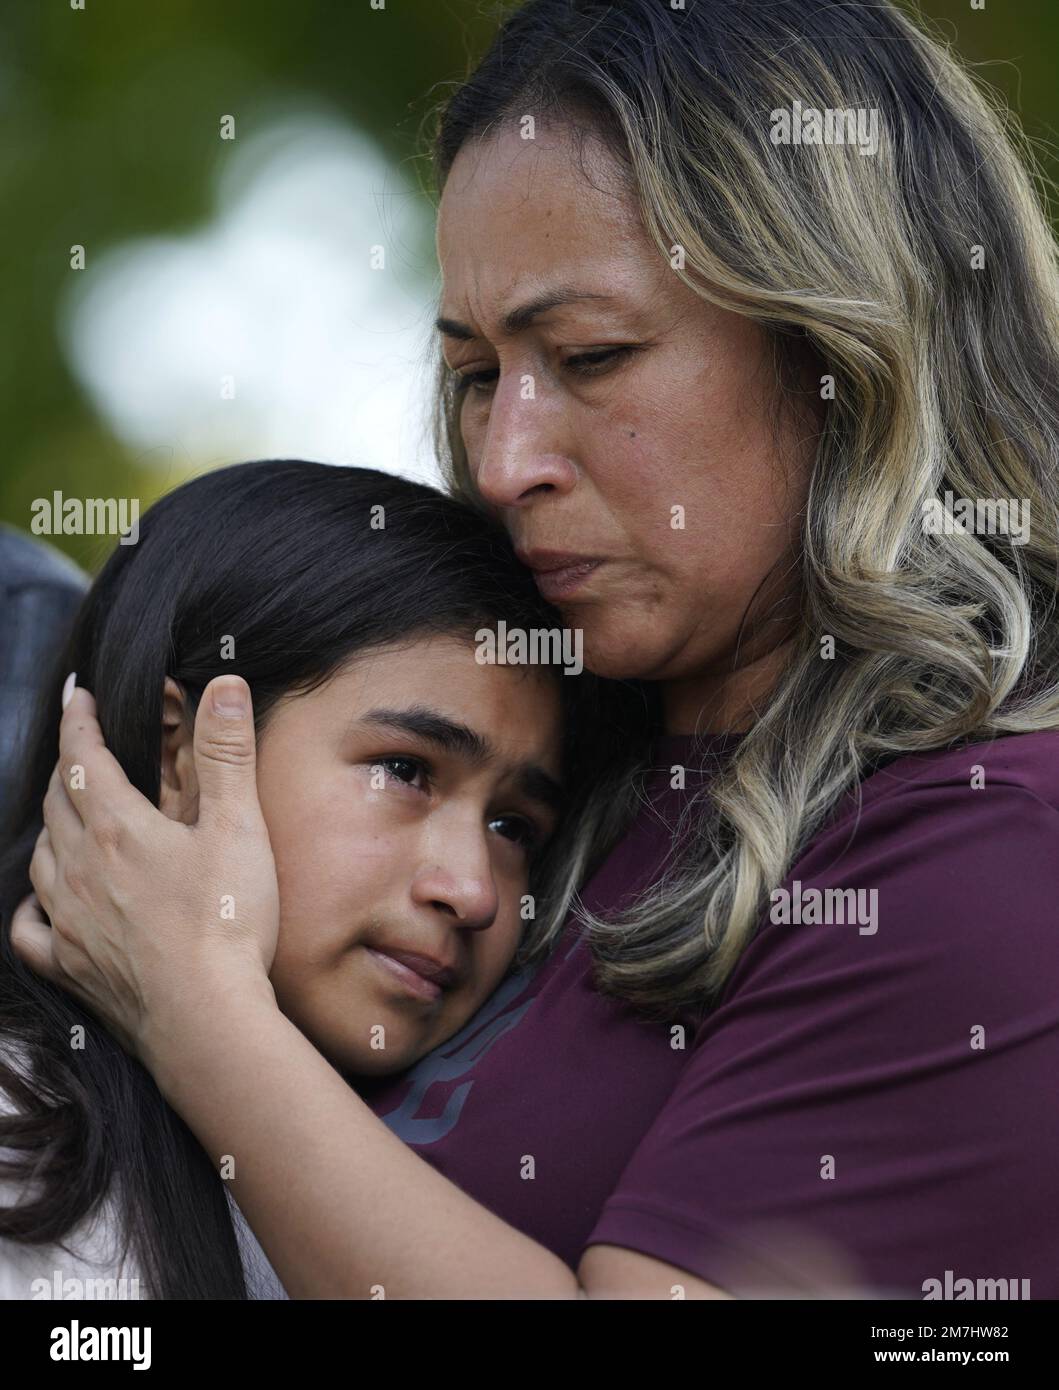 Beijing, Texas, USA. 24th May, 2022. People mourn for victims of a school mass shooting in Uvalde, Texas, the United States, May 26, 2022. At least 19 children and two adults were killed in a shooting at Robb Elementary School in the town of Uvalde, Texas, on May 24, 2022. Credit: Wu Xiaoling/Xinhua/Alamy Live News Stock Photo